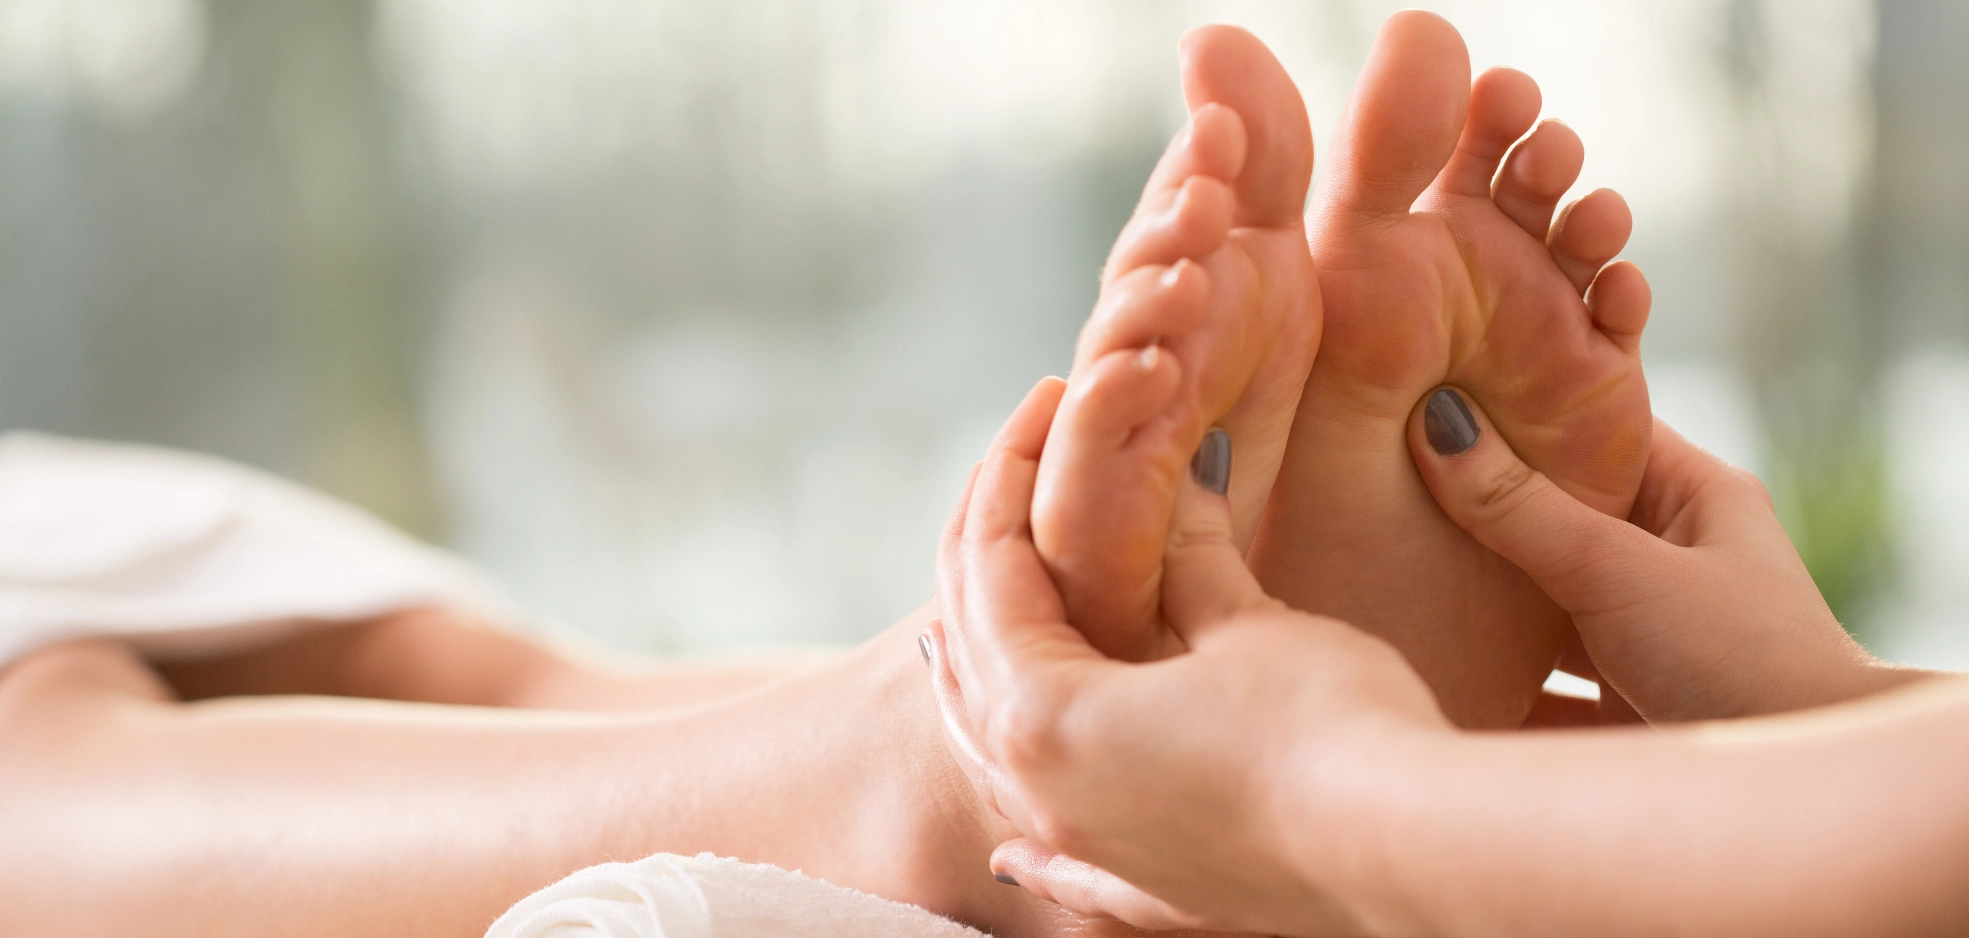 Carousel Image for Attune Reflexology Dorking is located in Dorking and has to offer Attune Reflexology Dorking, Foot Reflexology, Relaxation Calm, Relax, Unwind